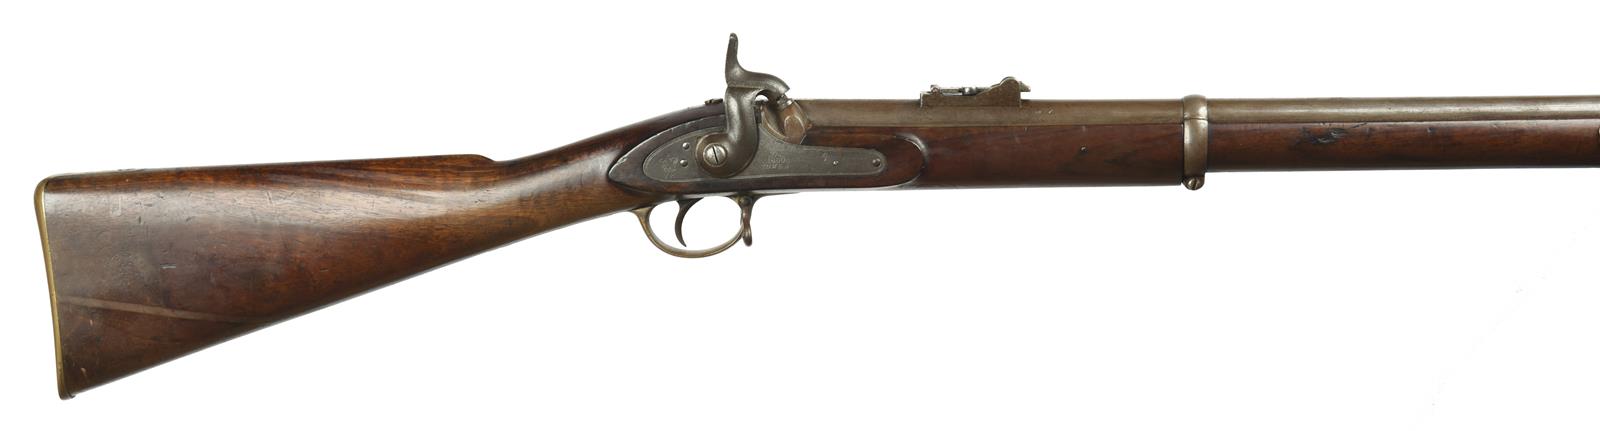 A .577 British pattern 1853 rifle musket, 3rd model, barrel 39 in., and retained by screw-clamped